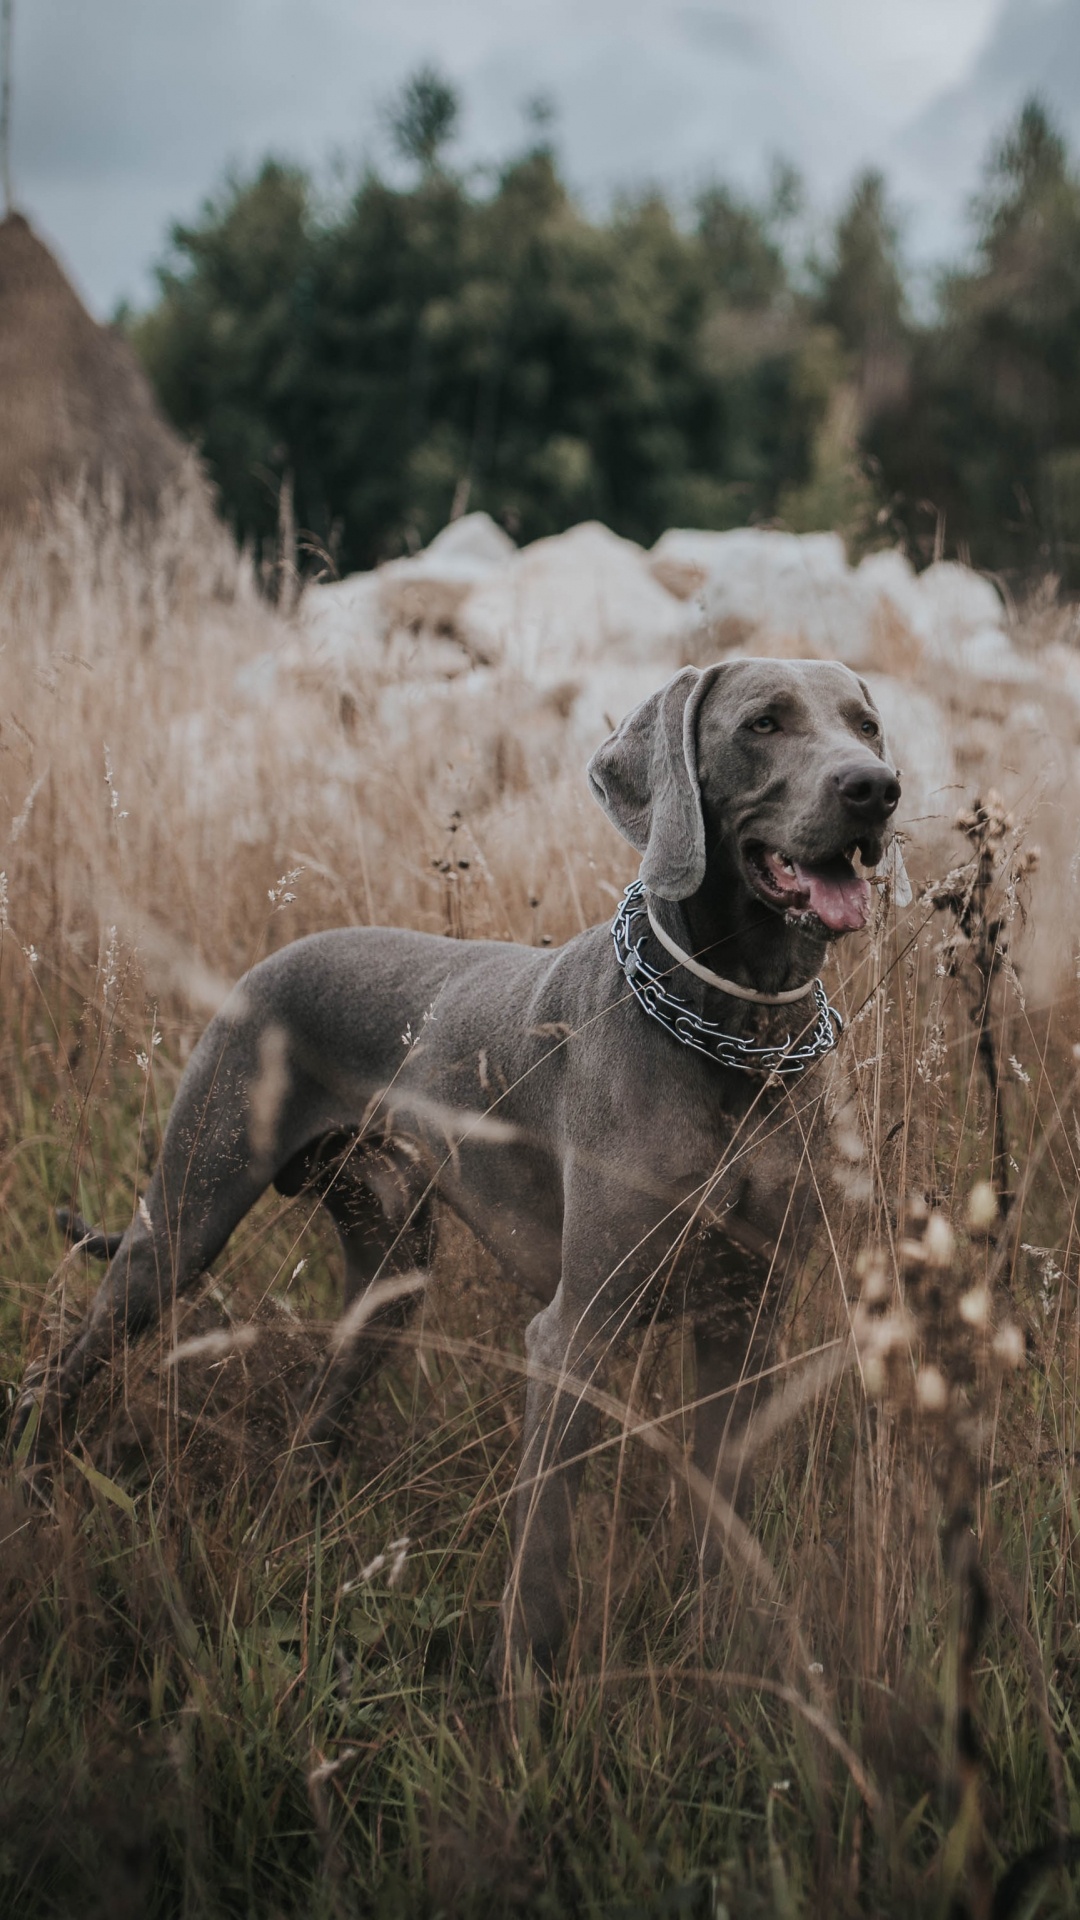 Gray Short Coated Dog on Brown Grass Field During Daytime. Wallpaper in 1080x1920 Resolution